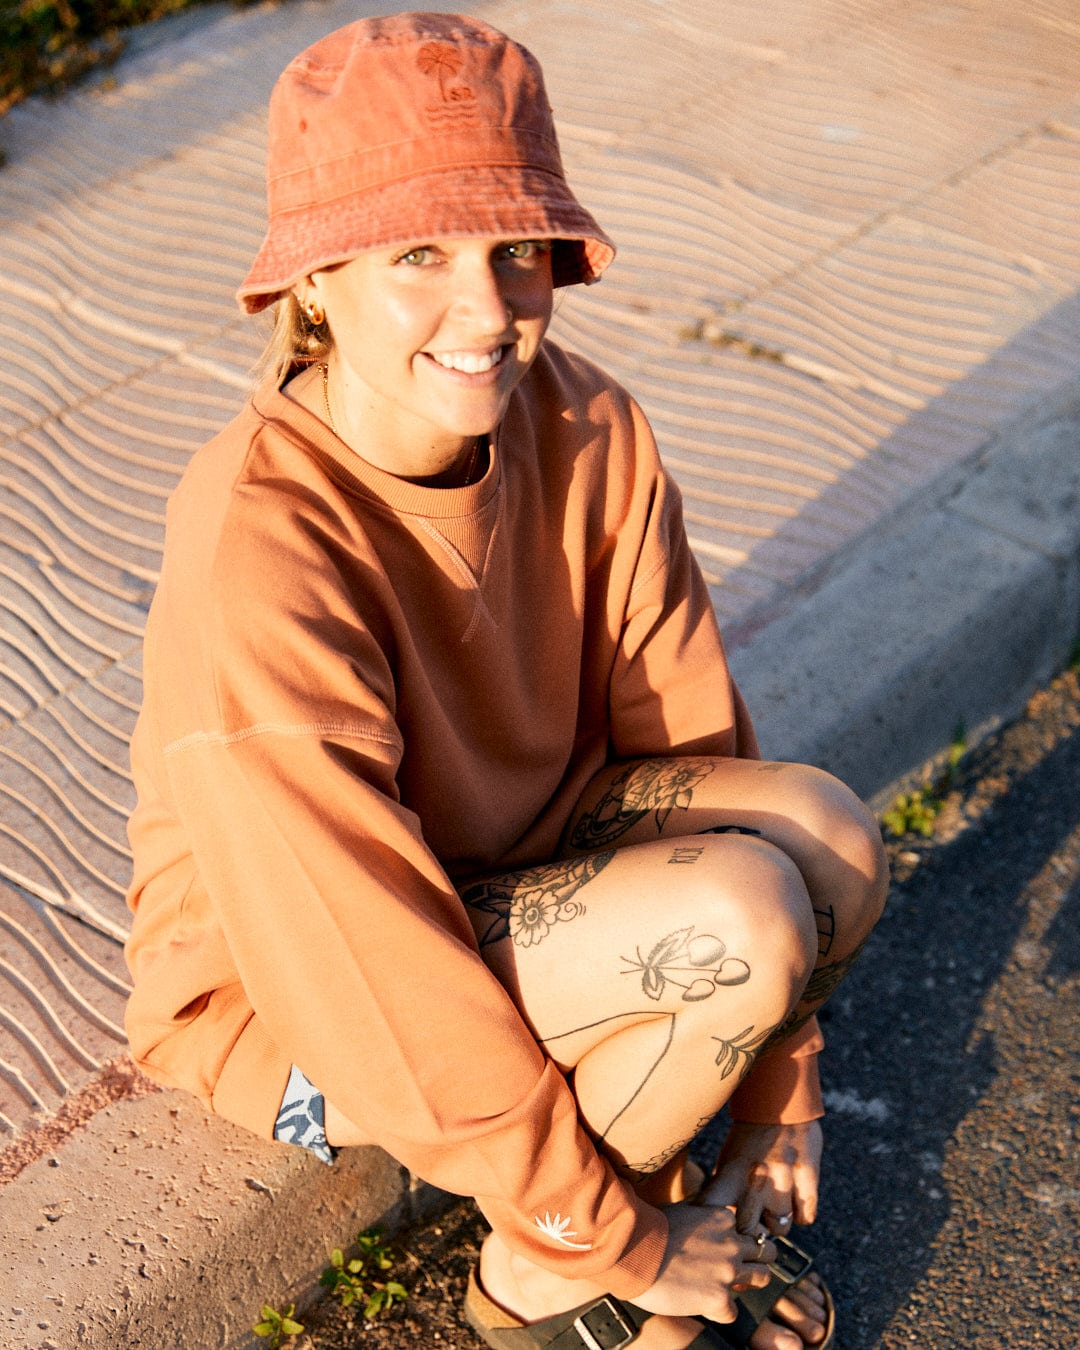 Person wearing an orange bucket hat and the Saltrock Journey - Womens Sweatshirt - Peach with embroidered graphics, squatting on the curbside with tattoos visible on their legs, and smiling at the camera. The relaxed fit adds to their effortlessly cool vibe.